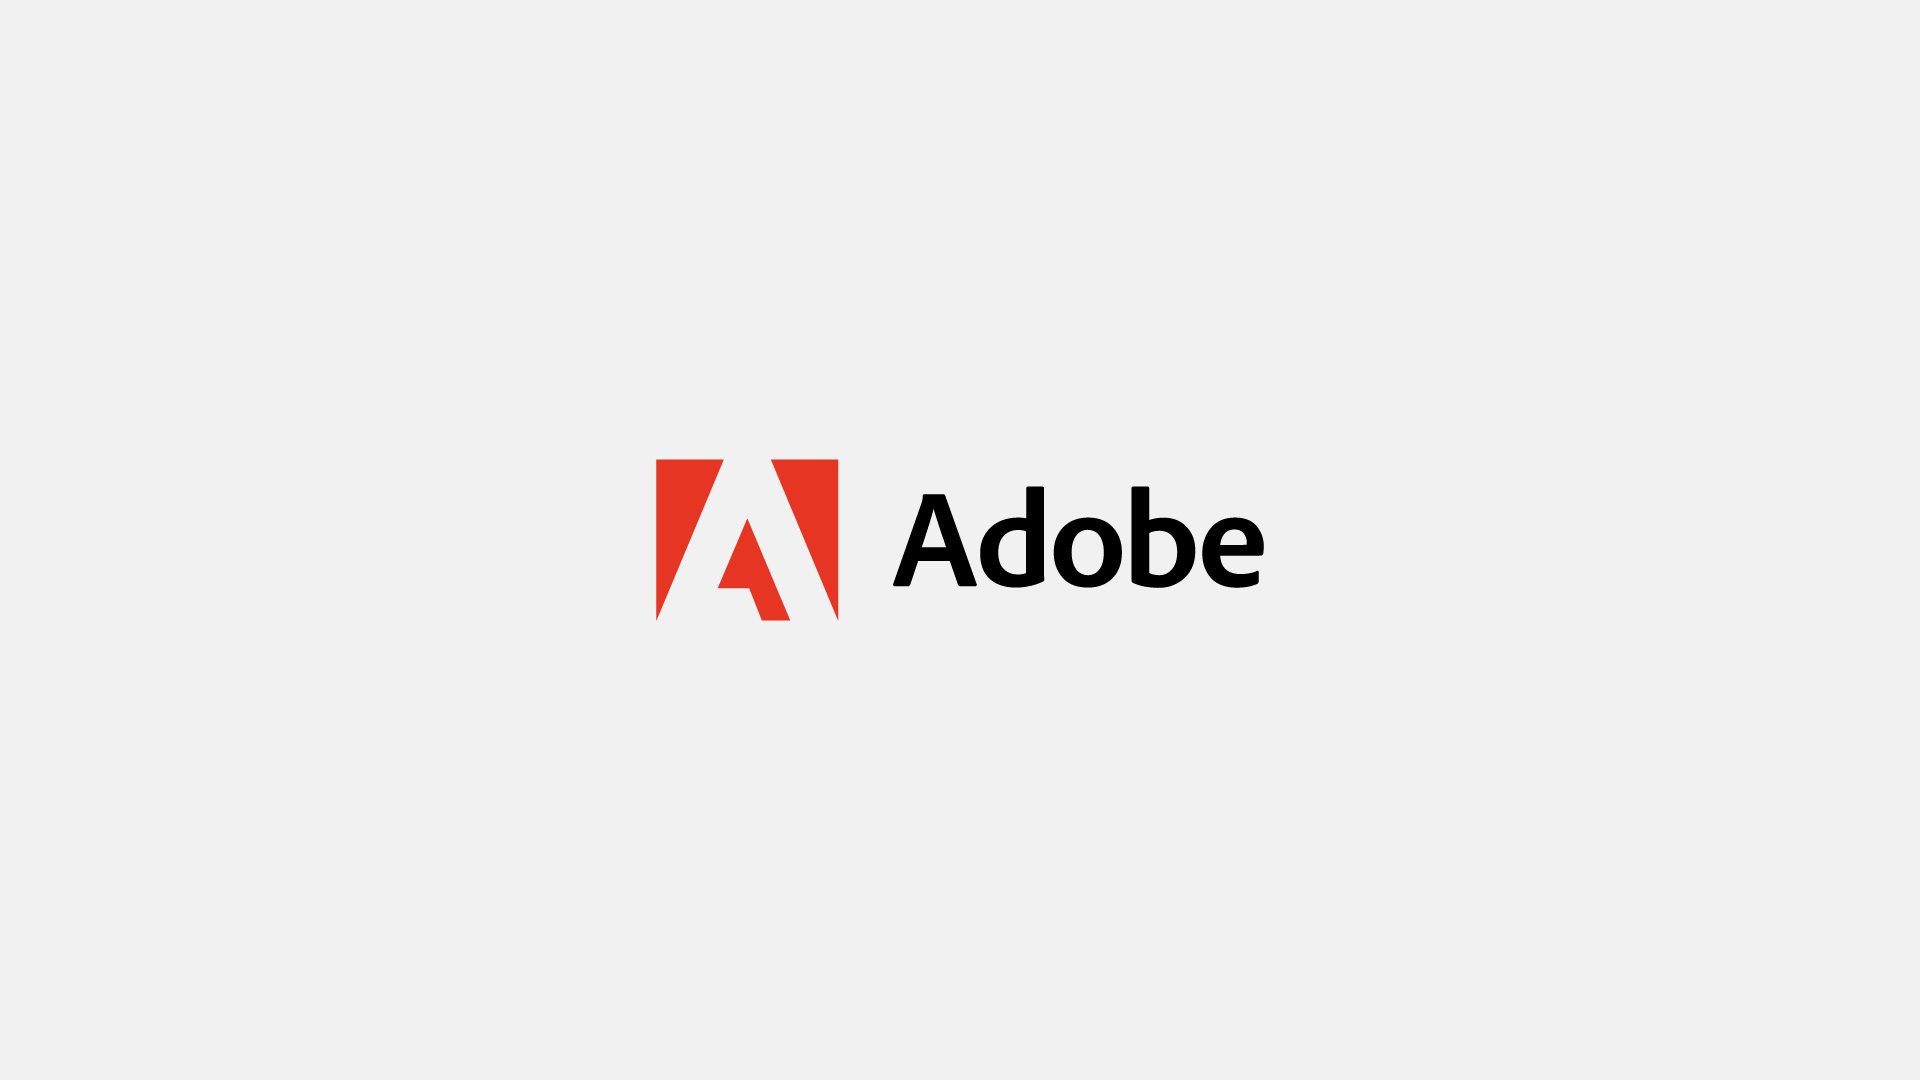 Adobe logo and Vector for free download